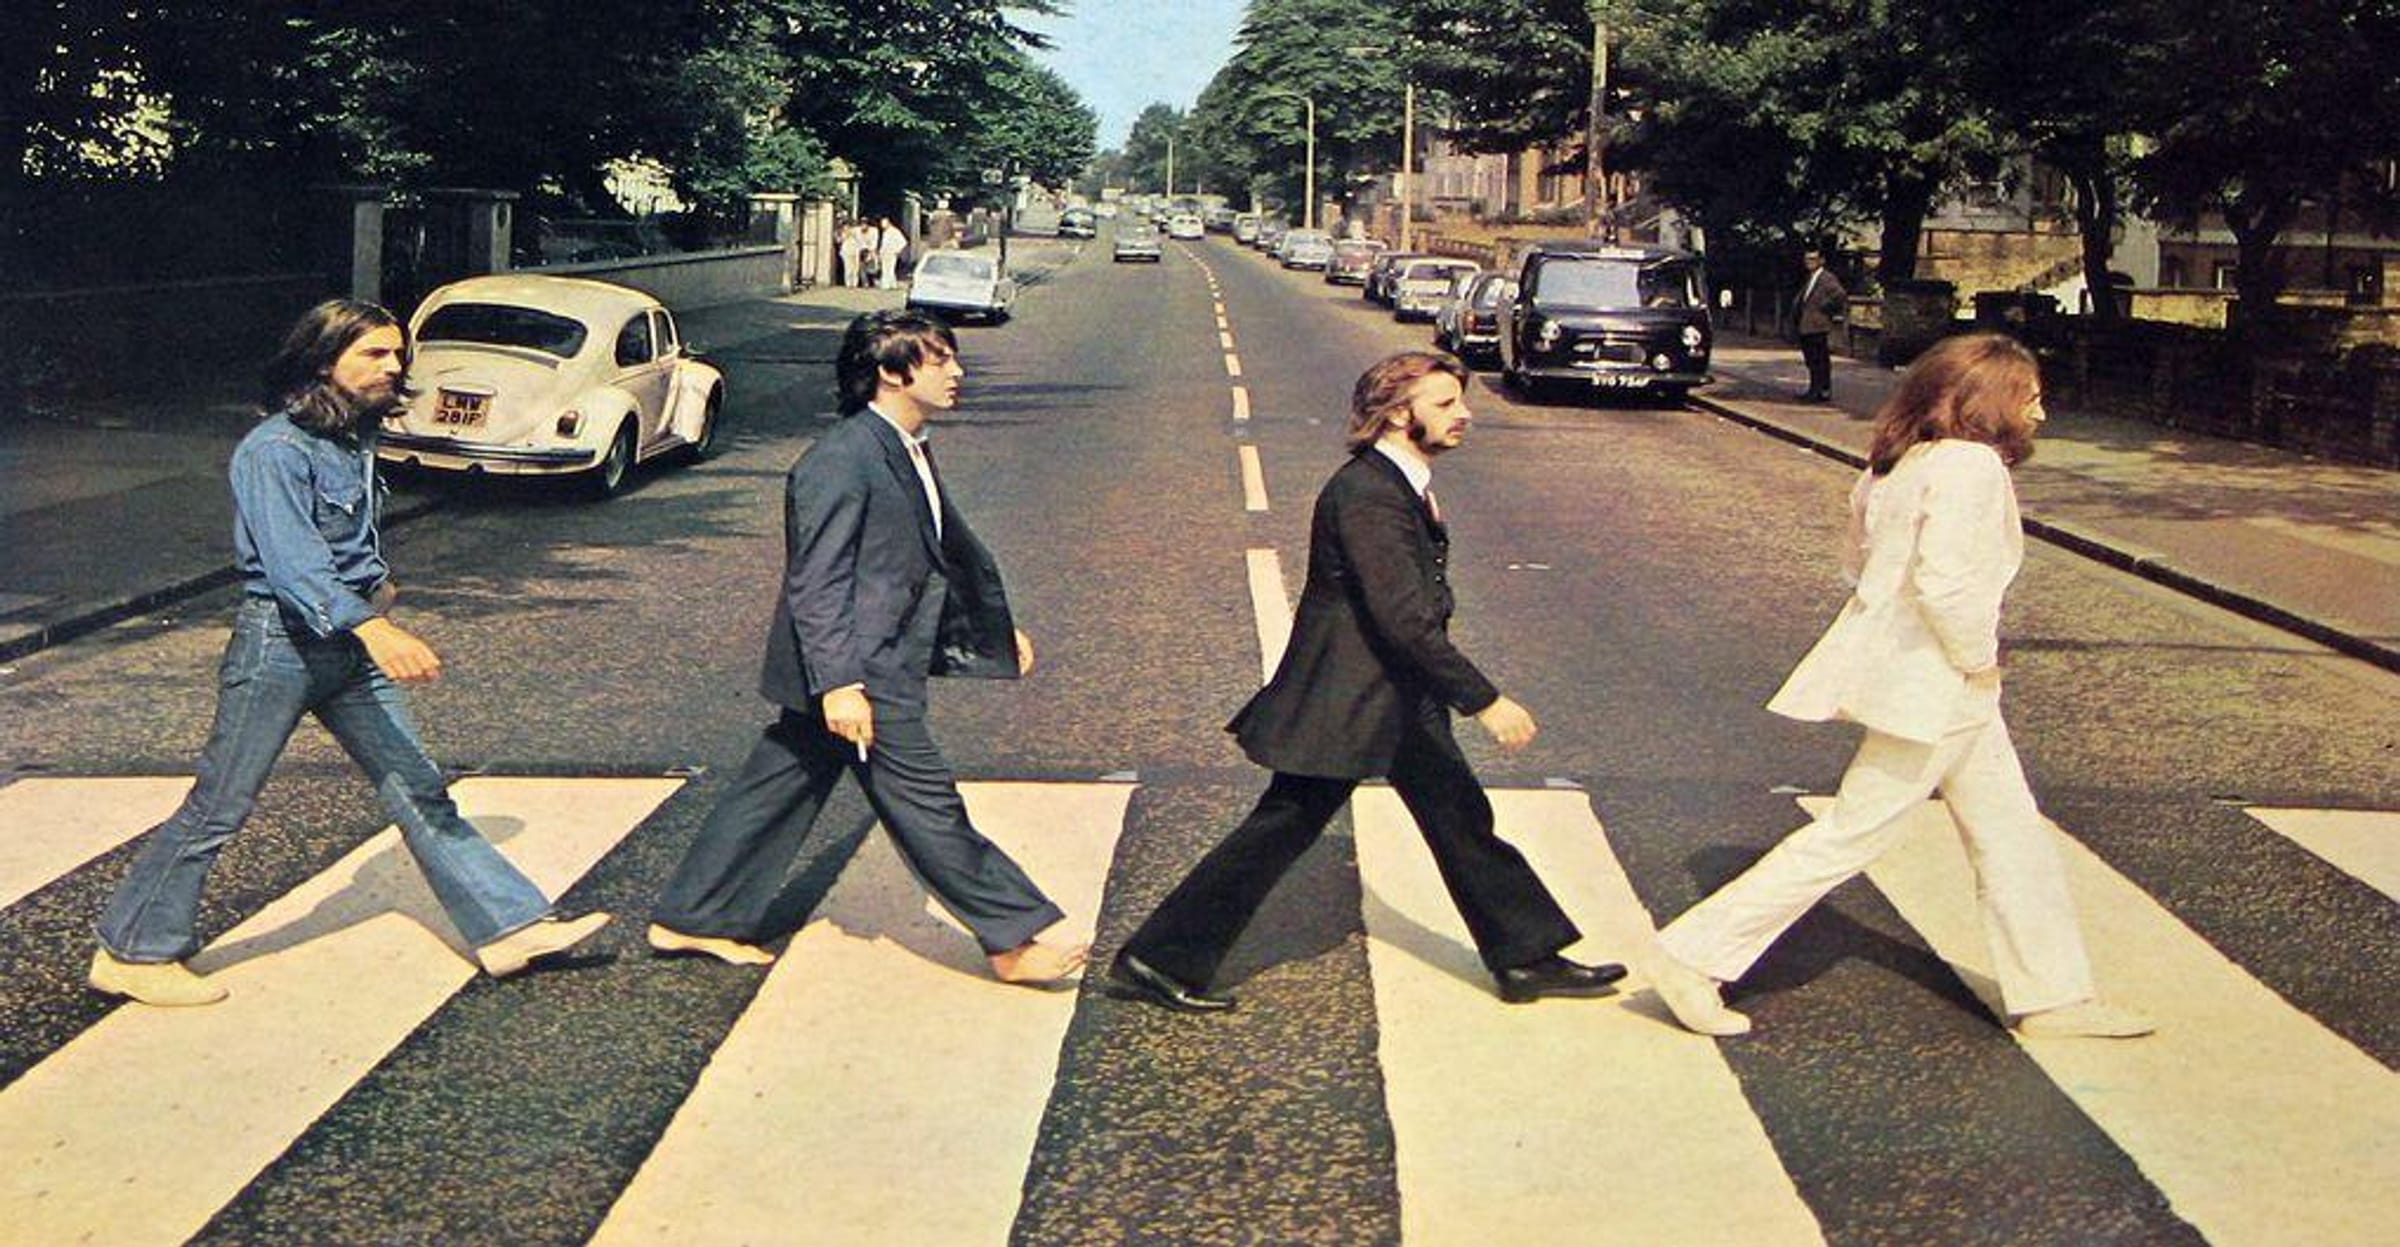 https://imgix.ranker.com/list_img_v2/13827/2733827/original/behind-the-scene-stories-from-the-beatles-abbey-road?fit=crop&fm=pjpg&q=80&dpr=2&w=1200&h=720